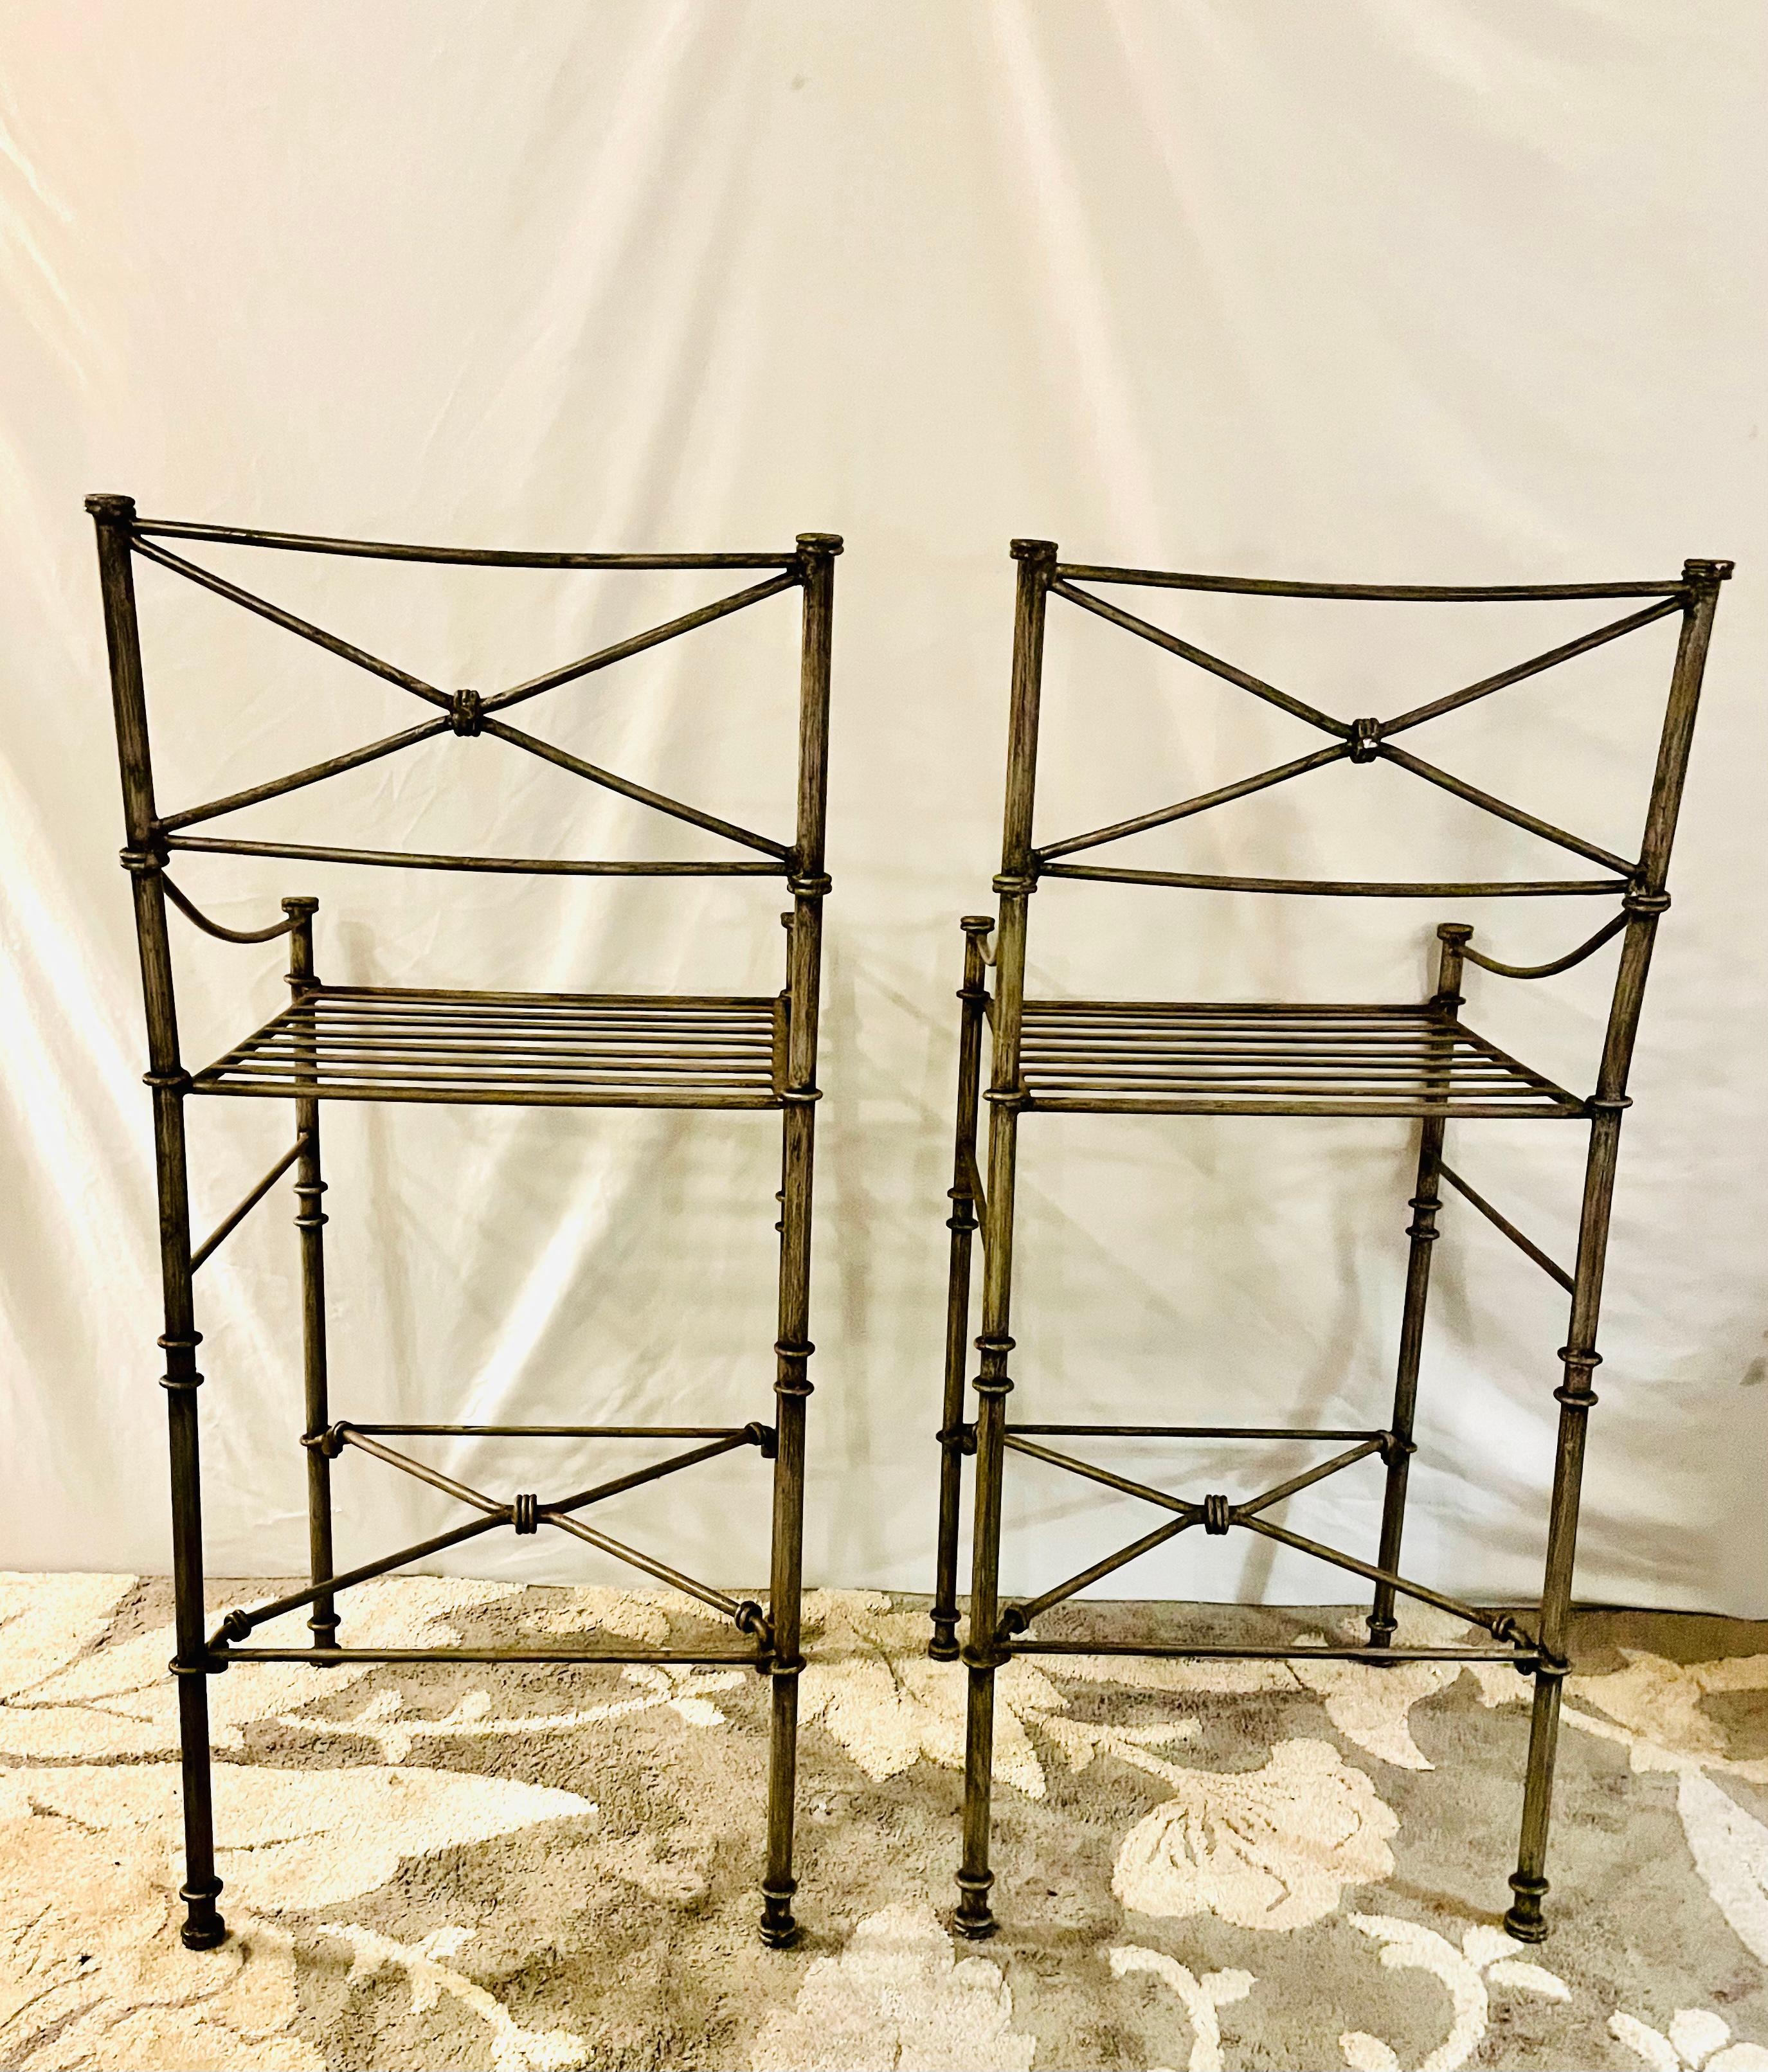 Giacometti Inspired Wrought Iron Chairs A Set of Bar Stool Dining Chairs For Sale 2